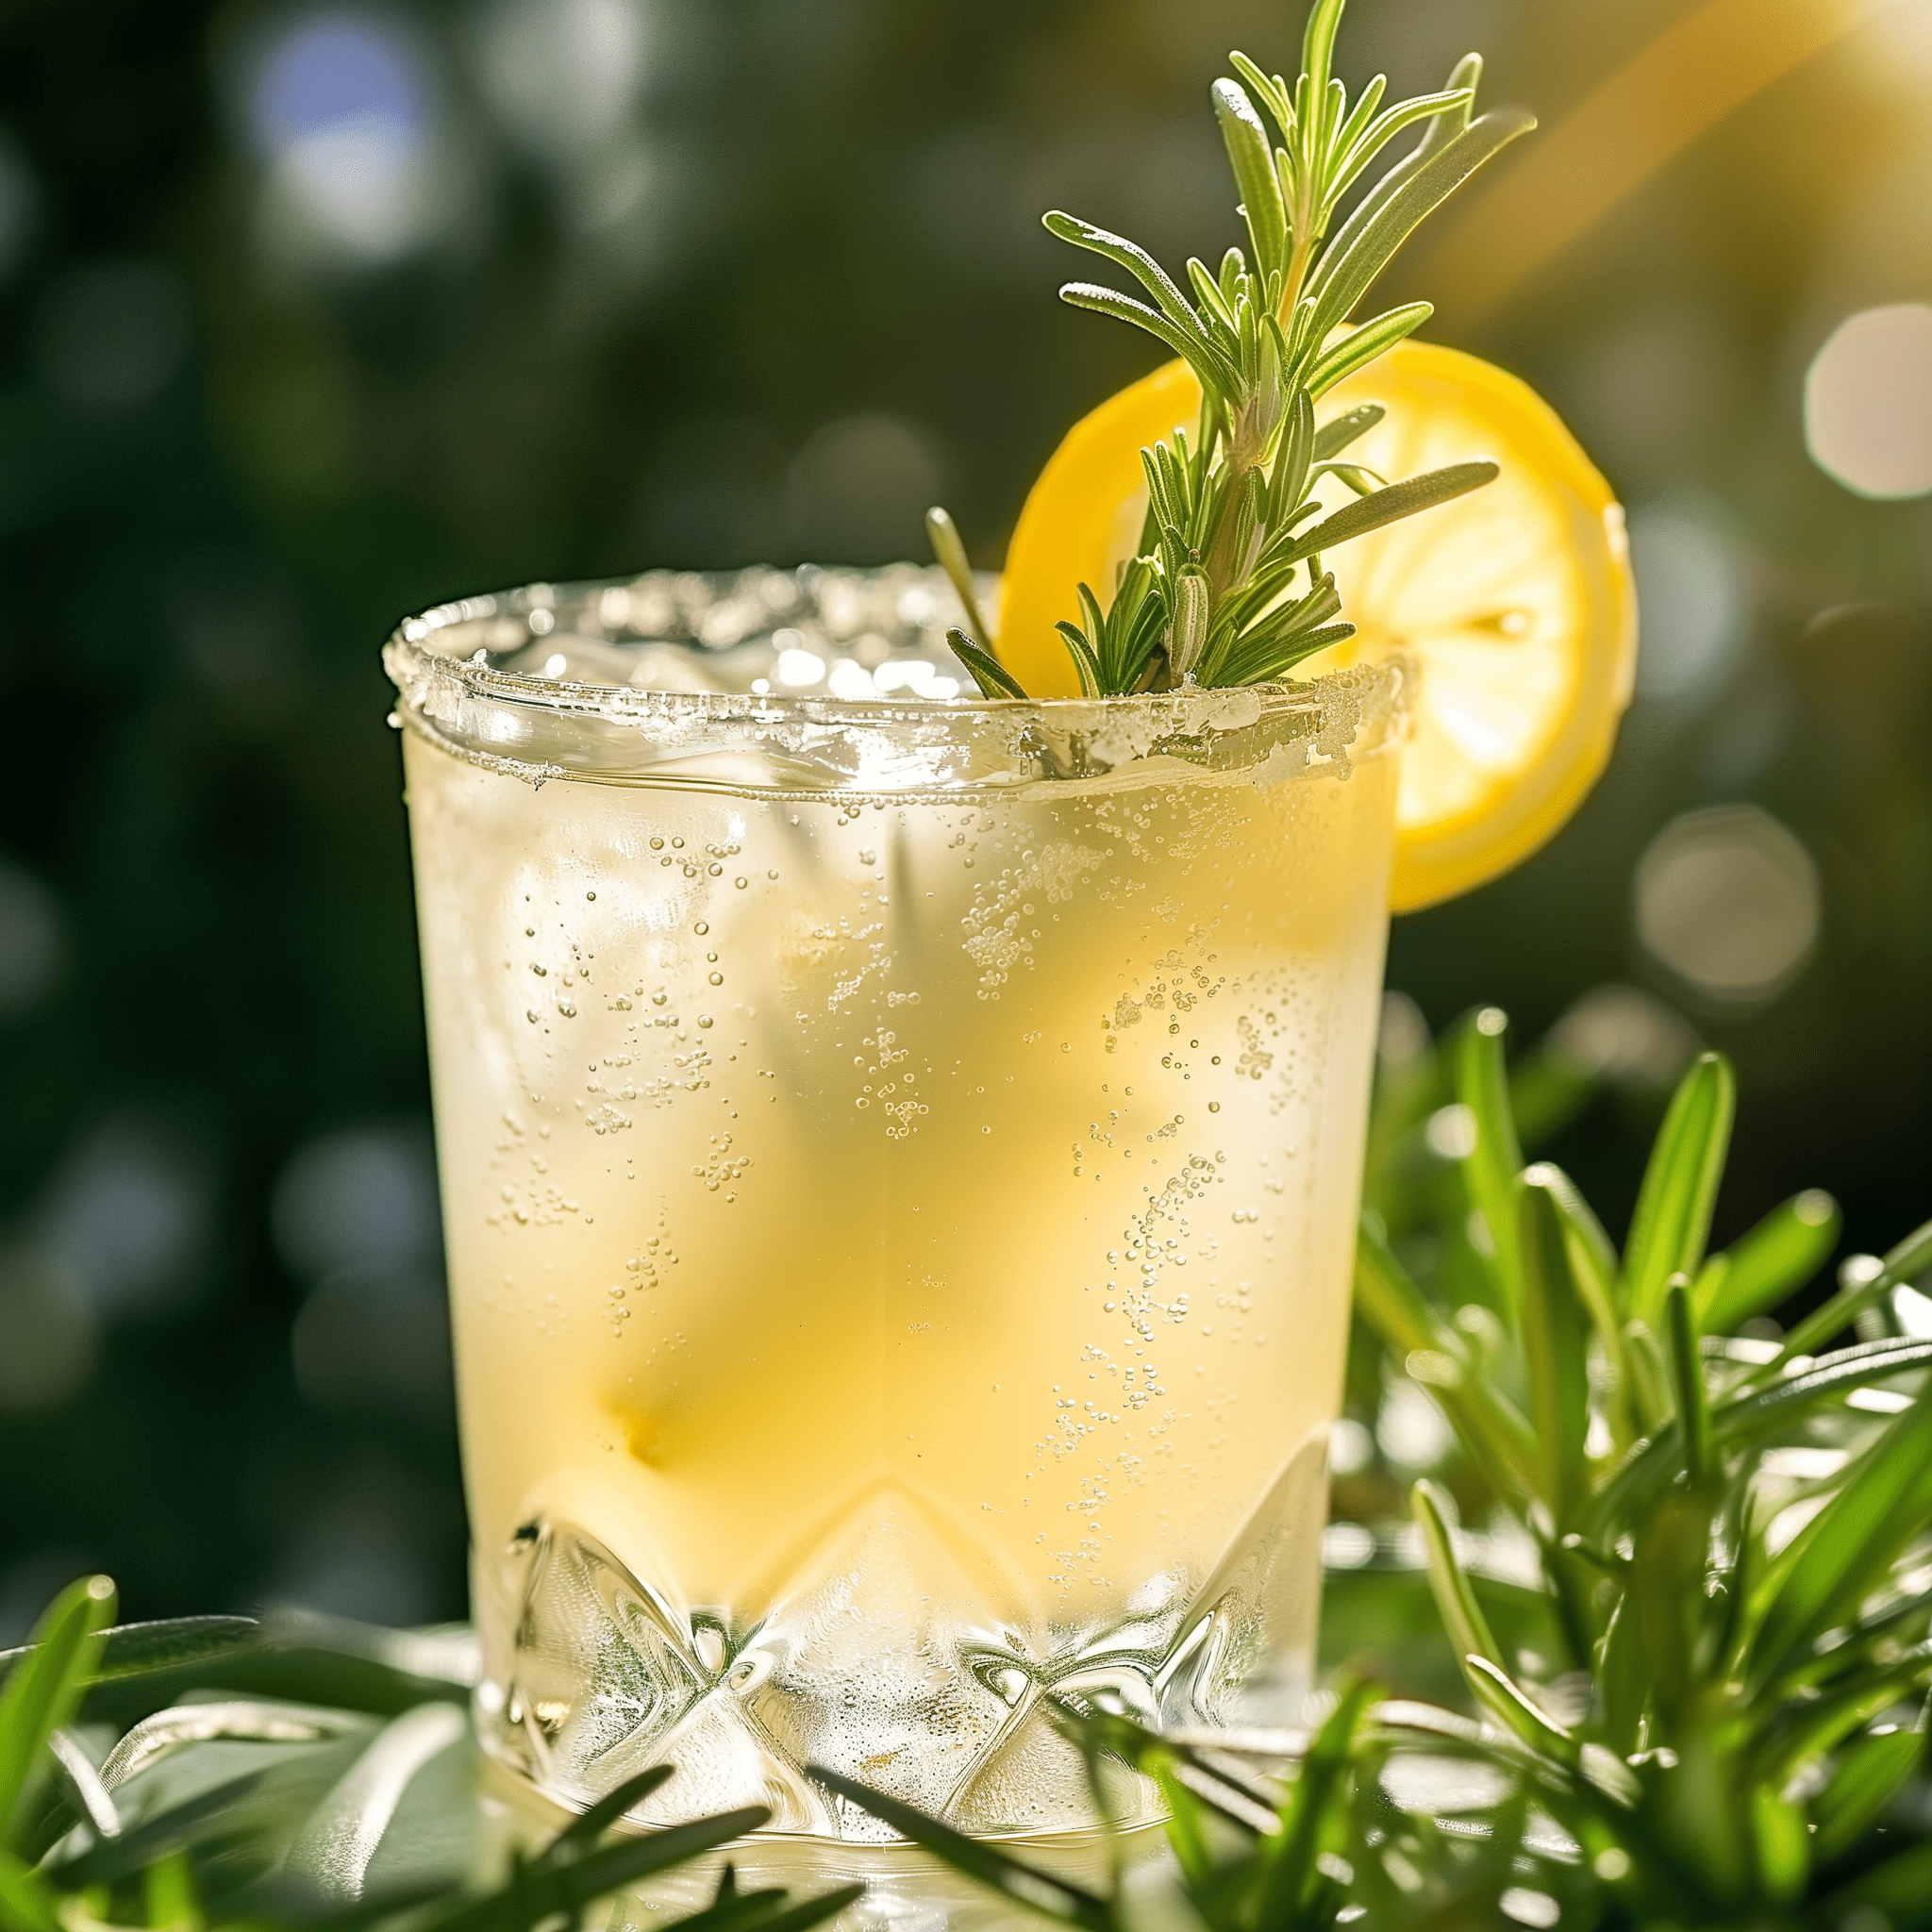 Lemon Refresher Recipe - The Lemon Refresher is a harmonious blend of sour and sweet, with a light effervescence from the club soda and a subtle herbal undertone from the rosemary. It's refreshing, zesty, and has a clean finish that leaves the palate invigorated.